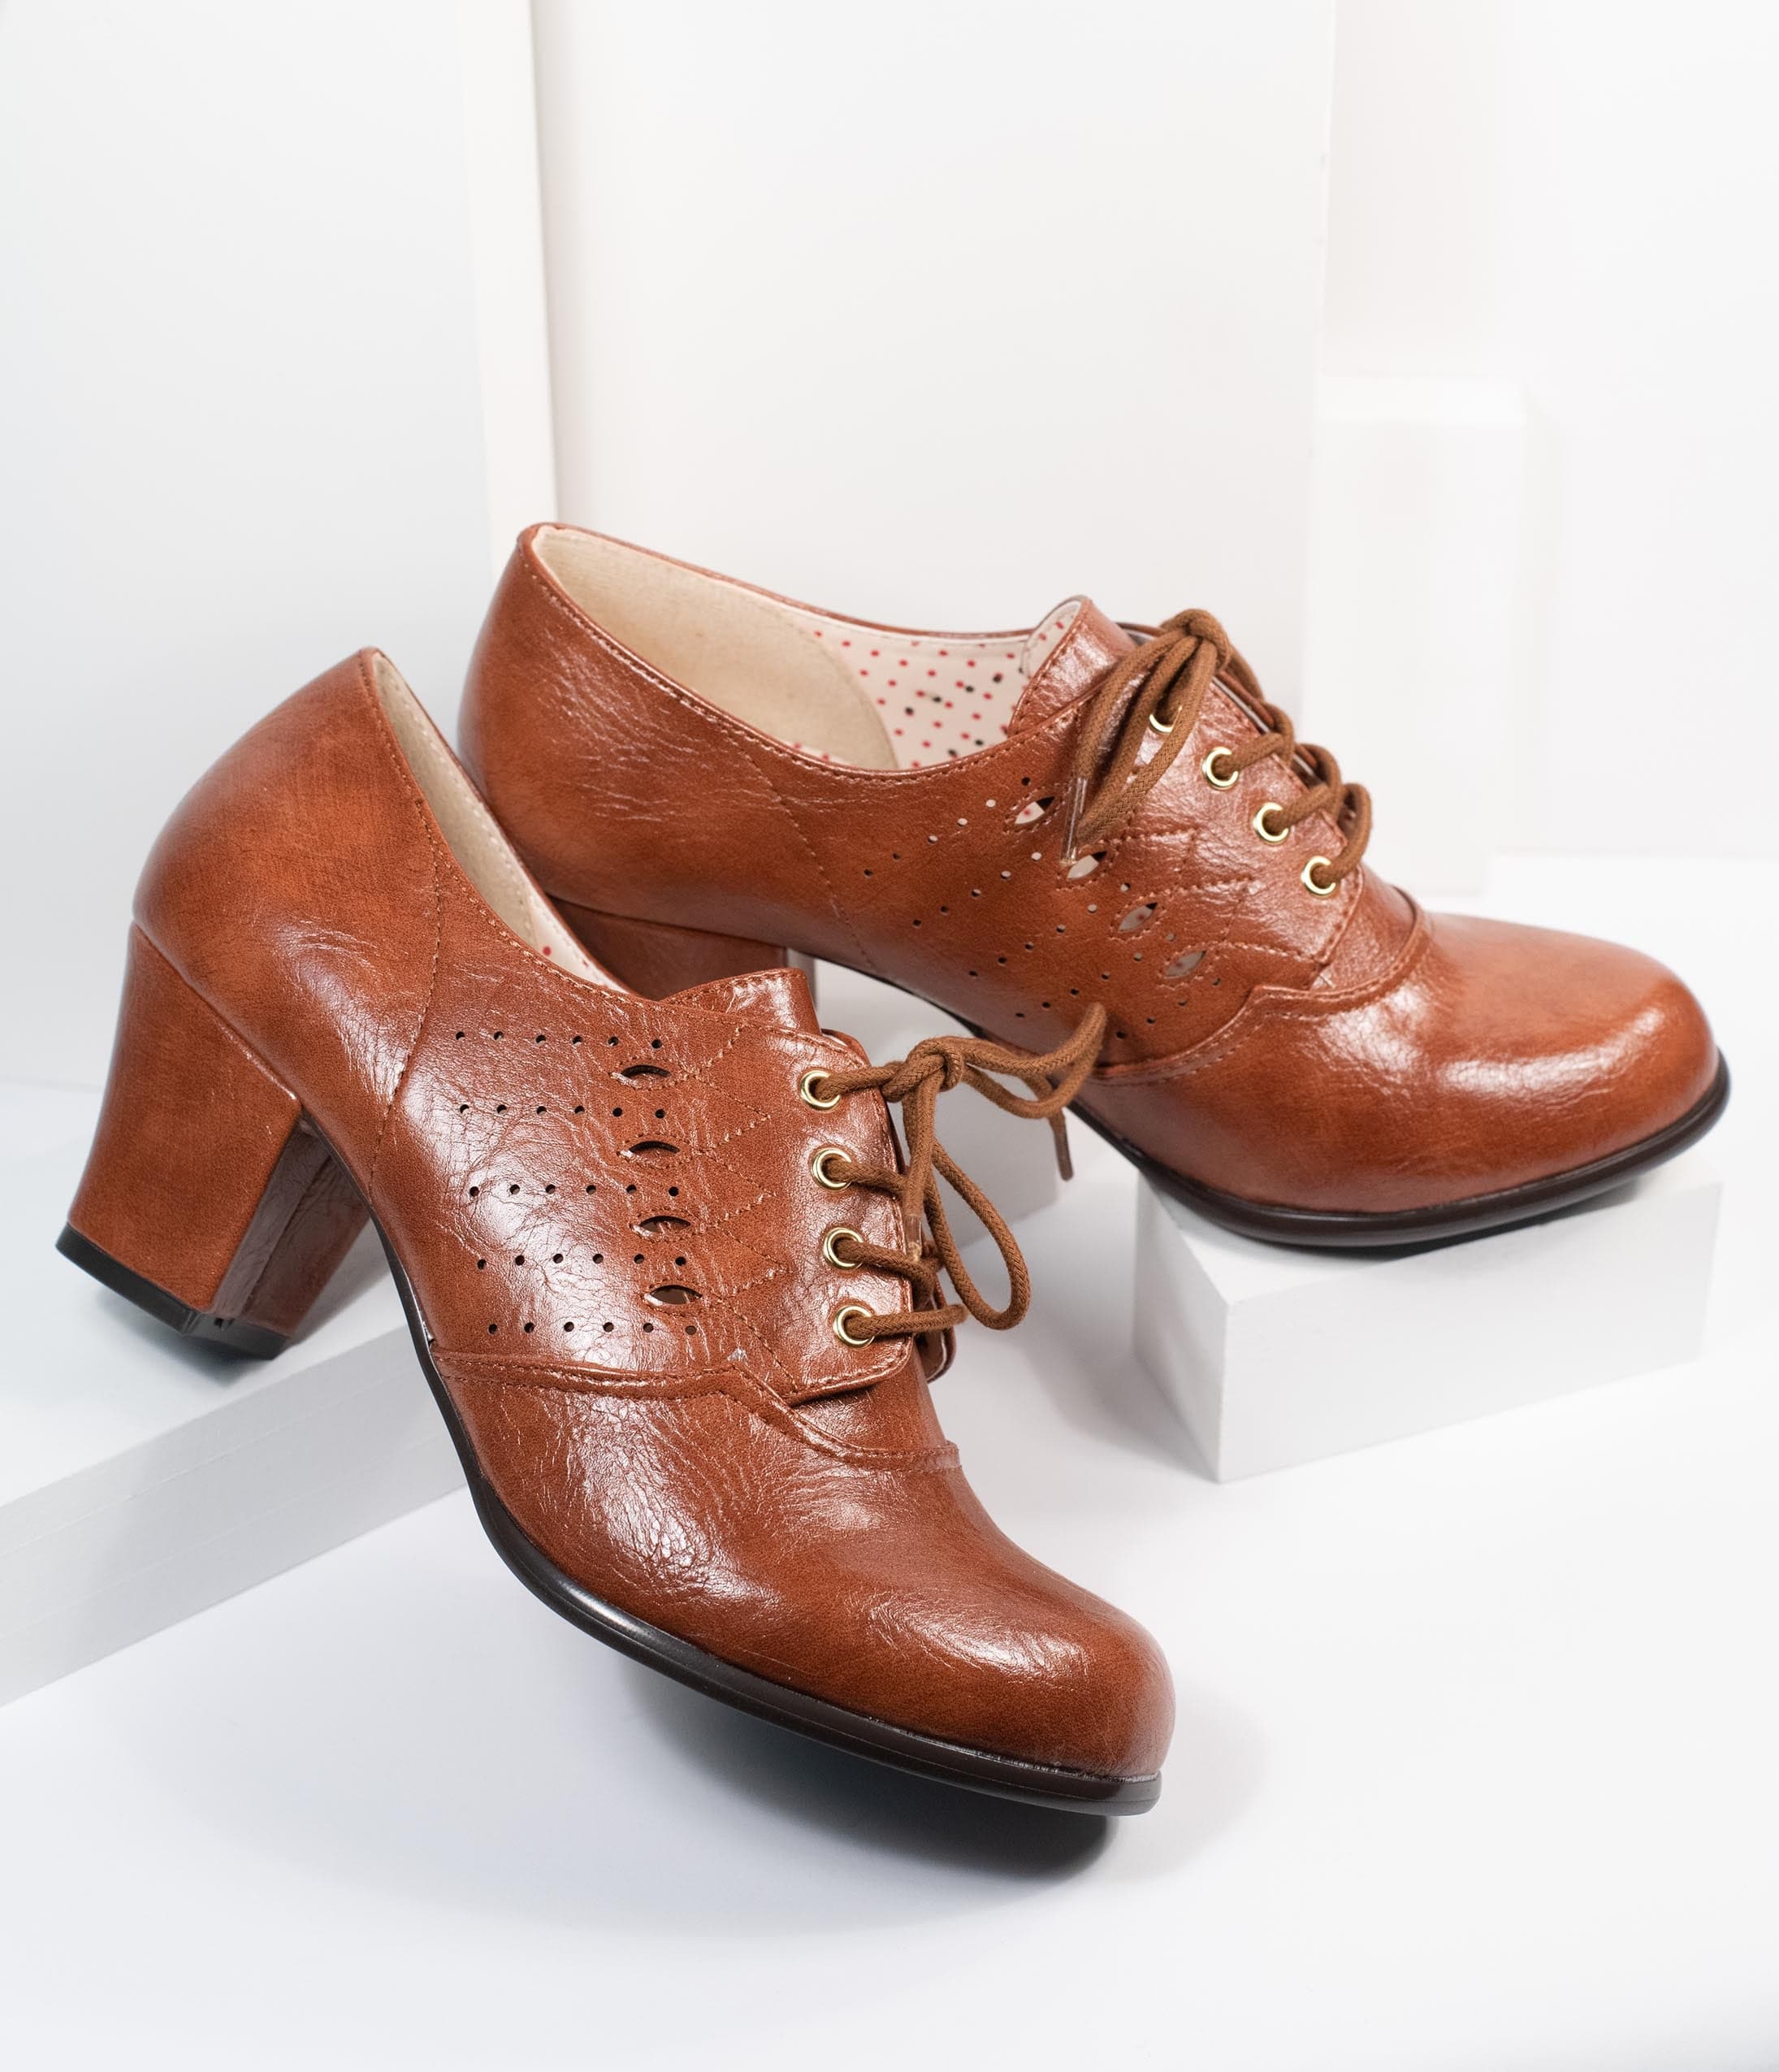 1930s Style Shoes For Women